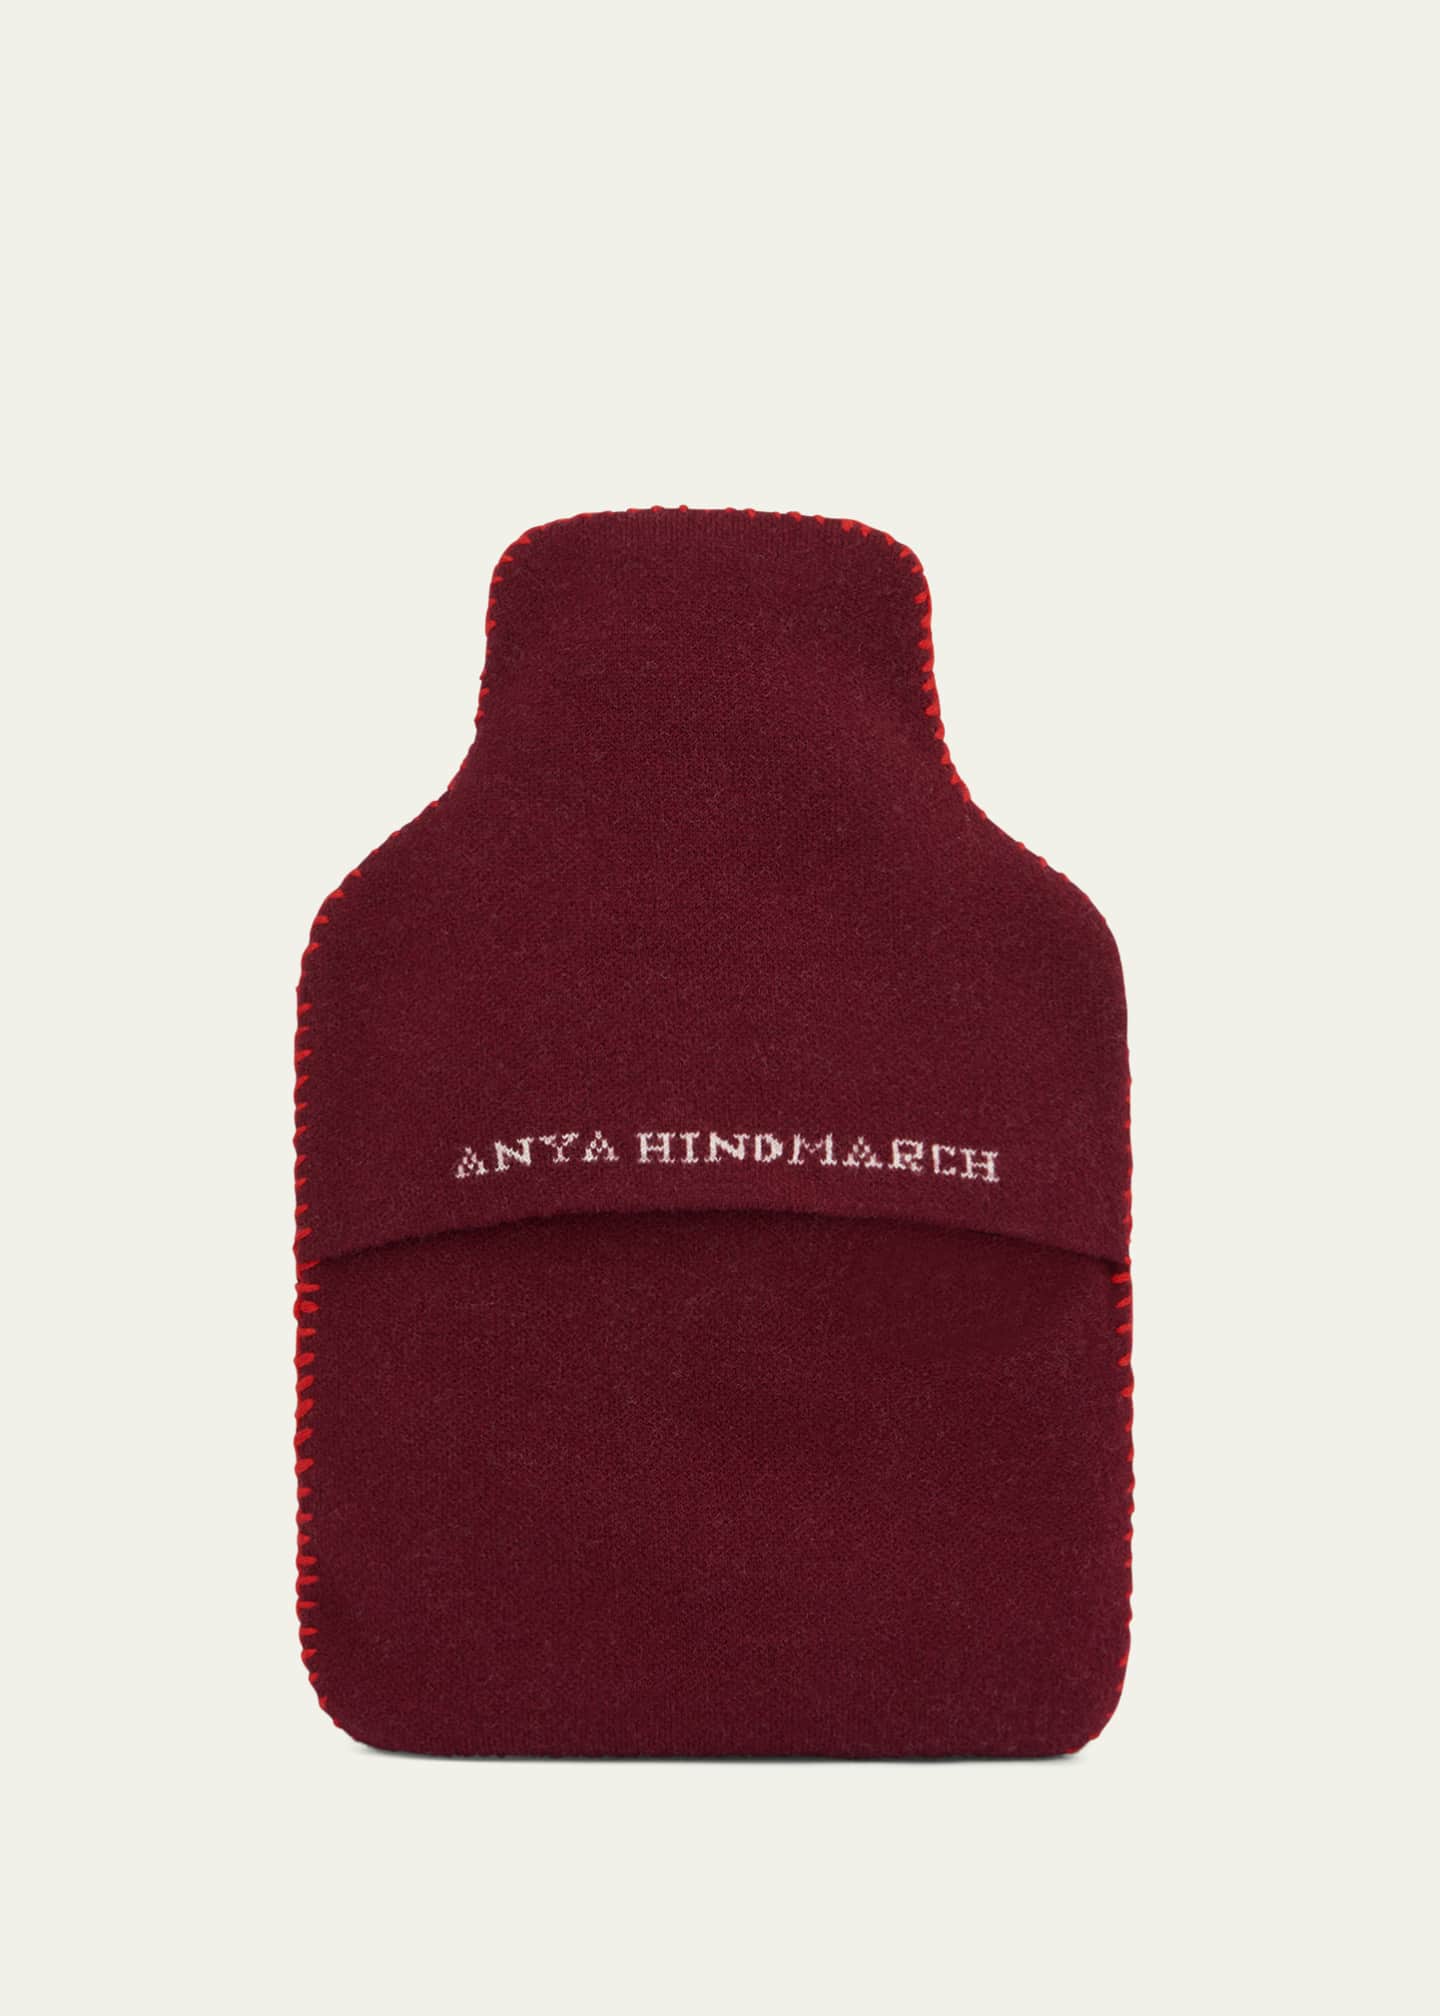 Anya Hindmarch Oops Red Hot Water Bottle Cover - Bergdorf Goodman